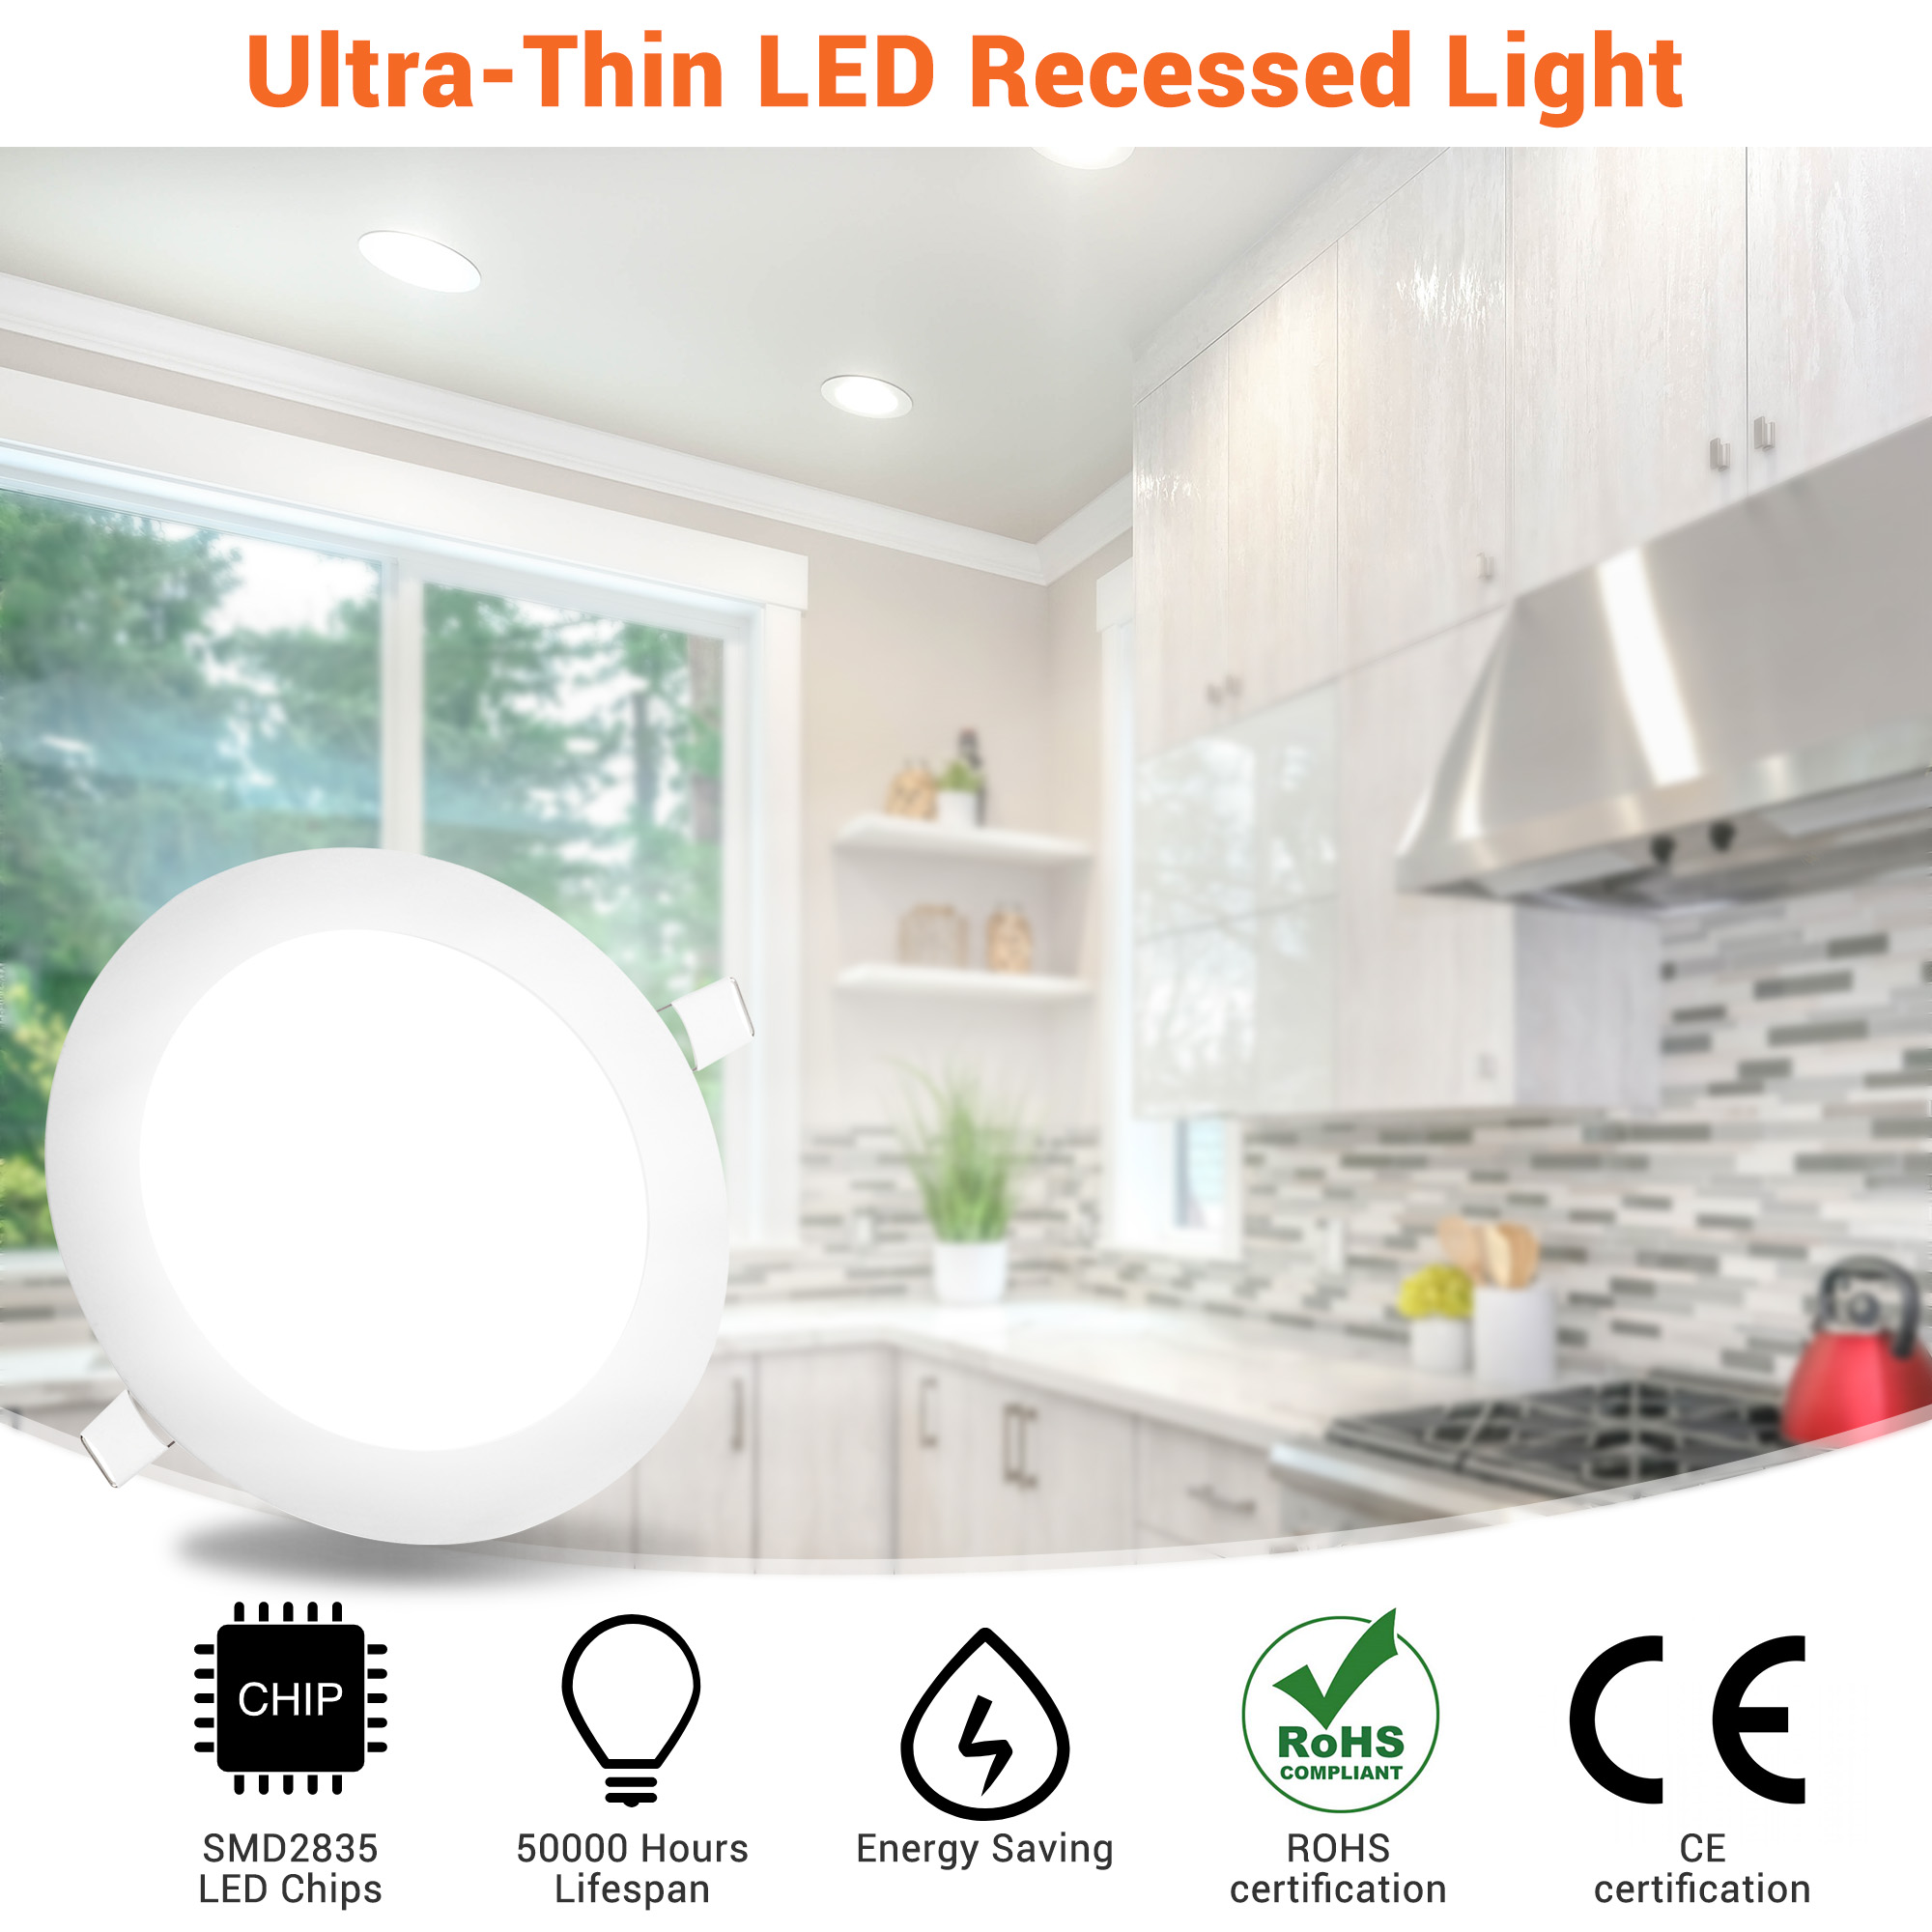 DELight Inch LED Recessed Light Ultra-thin Ceiling Panel 6000K Wafer Downlight  12W Eqv 100W Cool White 960LM Brightness ROHS Certified